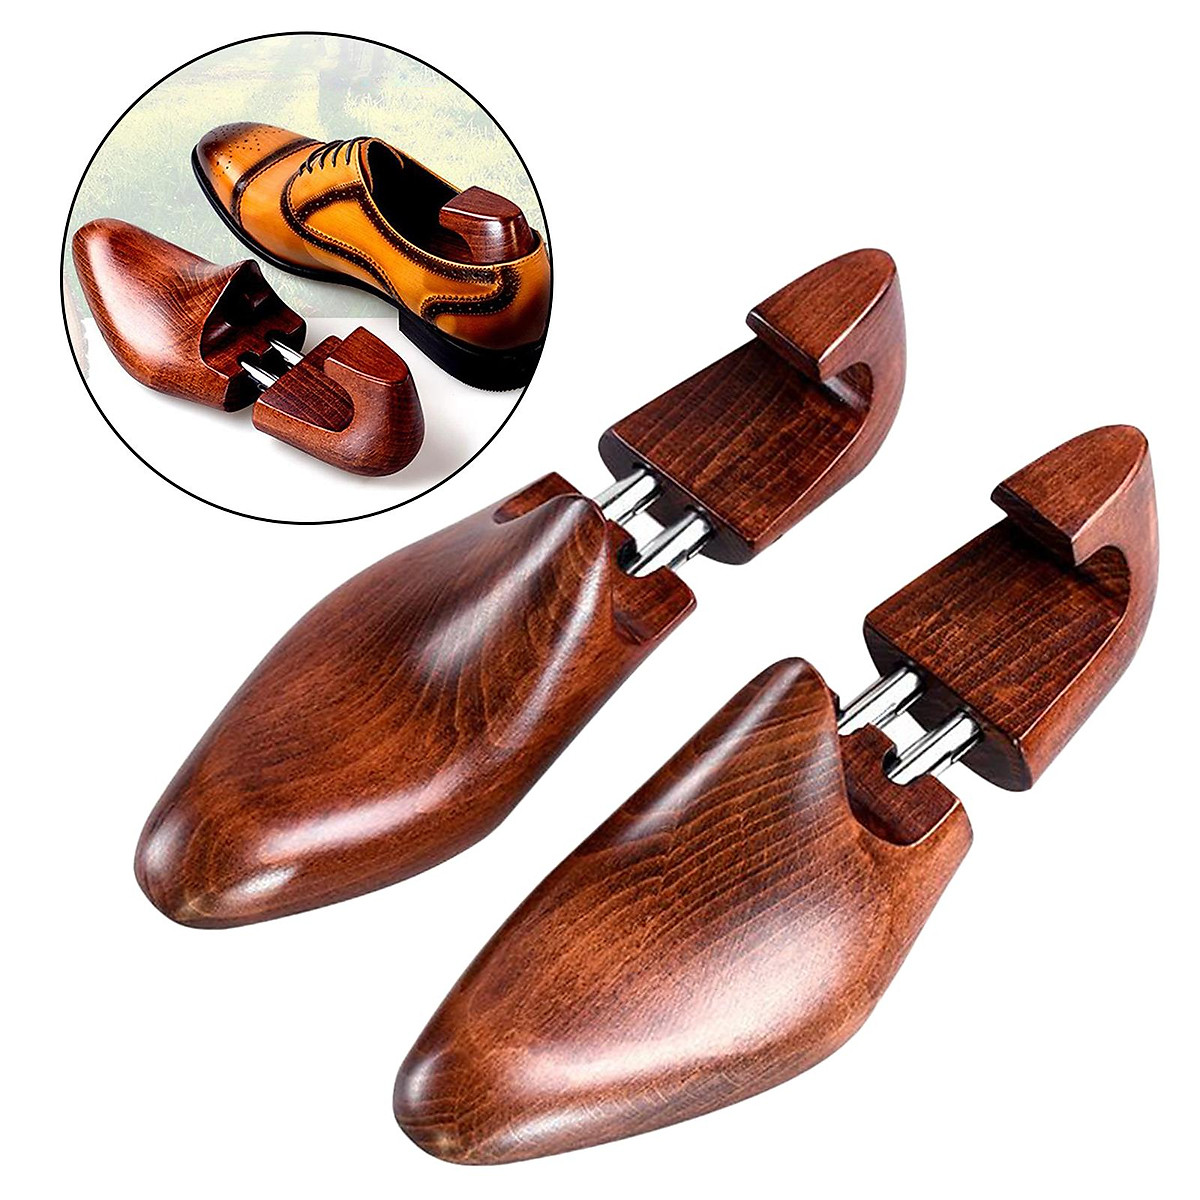 Adjustable Shoe Tree for Men Women , Durable Wooden Shoes Stretcher Shaper Boots  Tree Shoes Care Tool Gifts